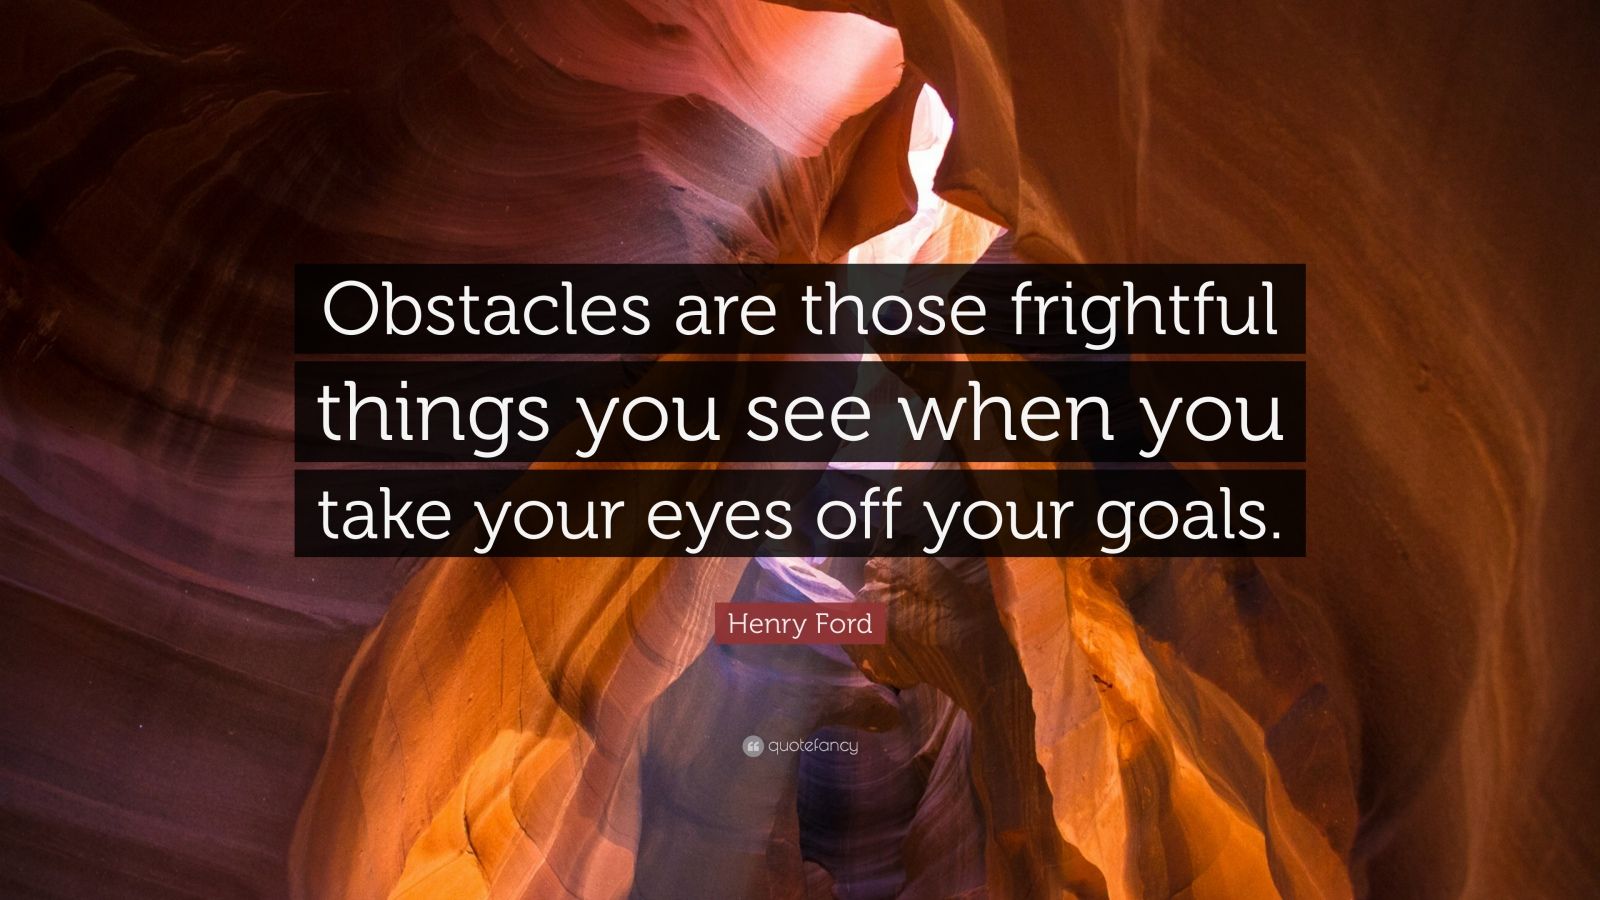 Henry ford quote obstacles #2